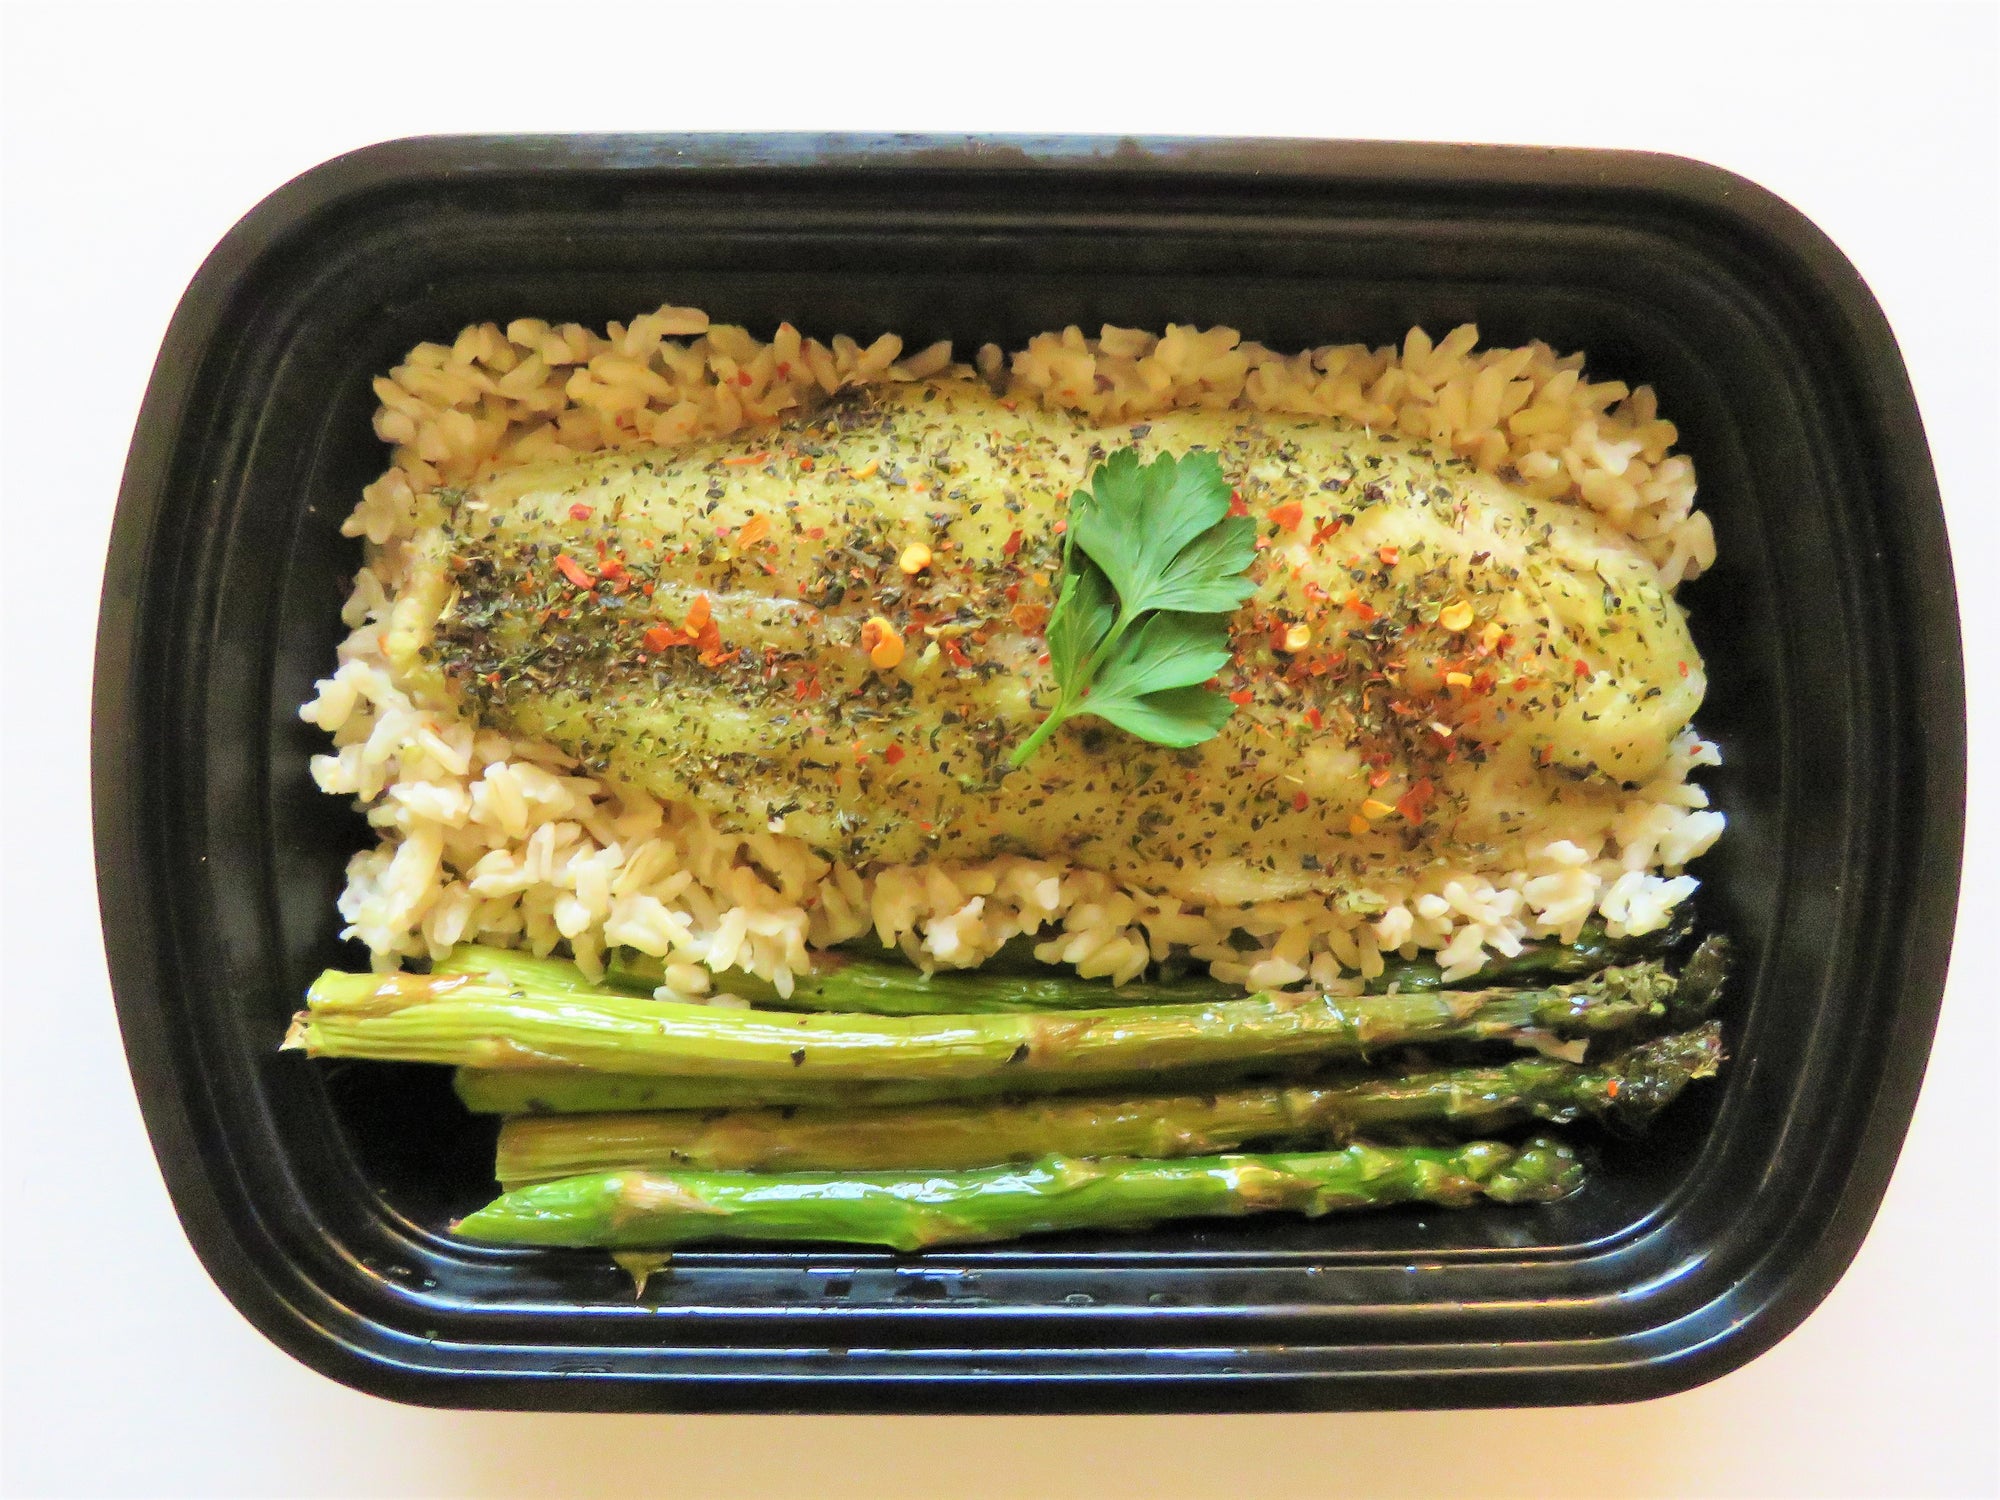 Oven Baked Basa Fillet with Brown Rice and Asparagus - GreenMeal Inc.